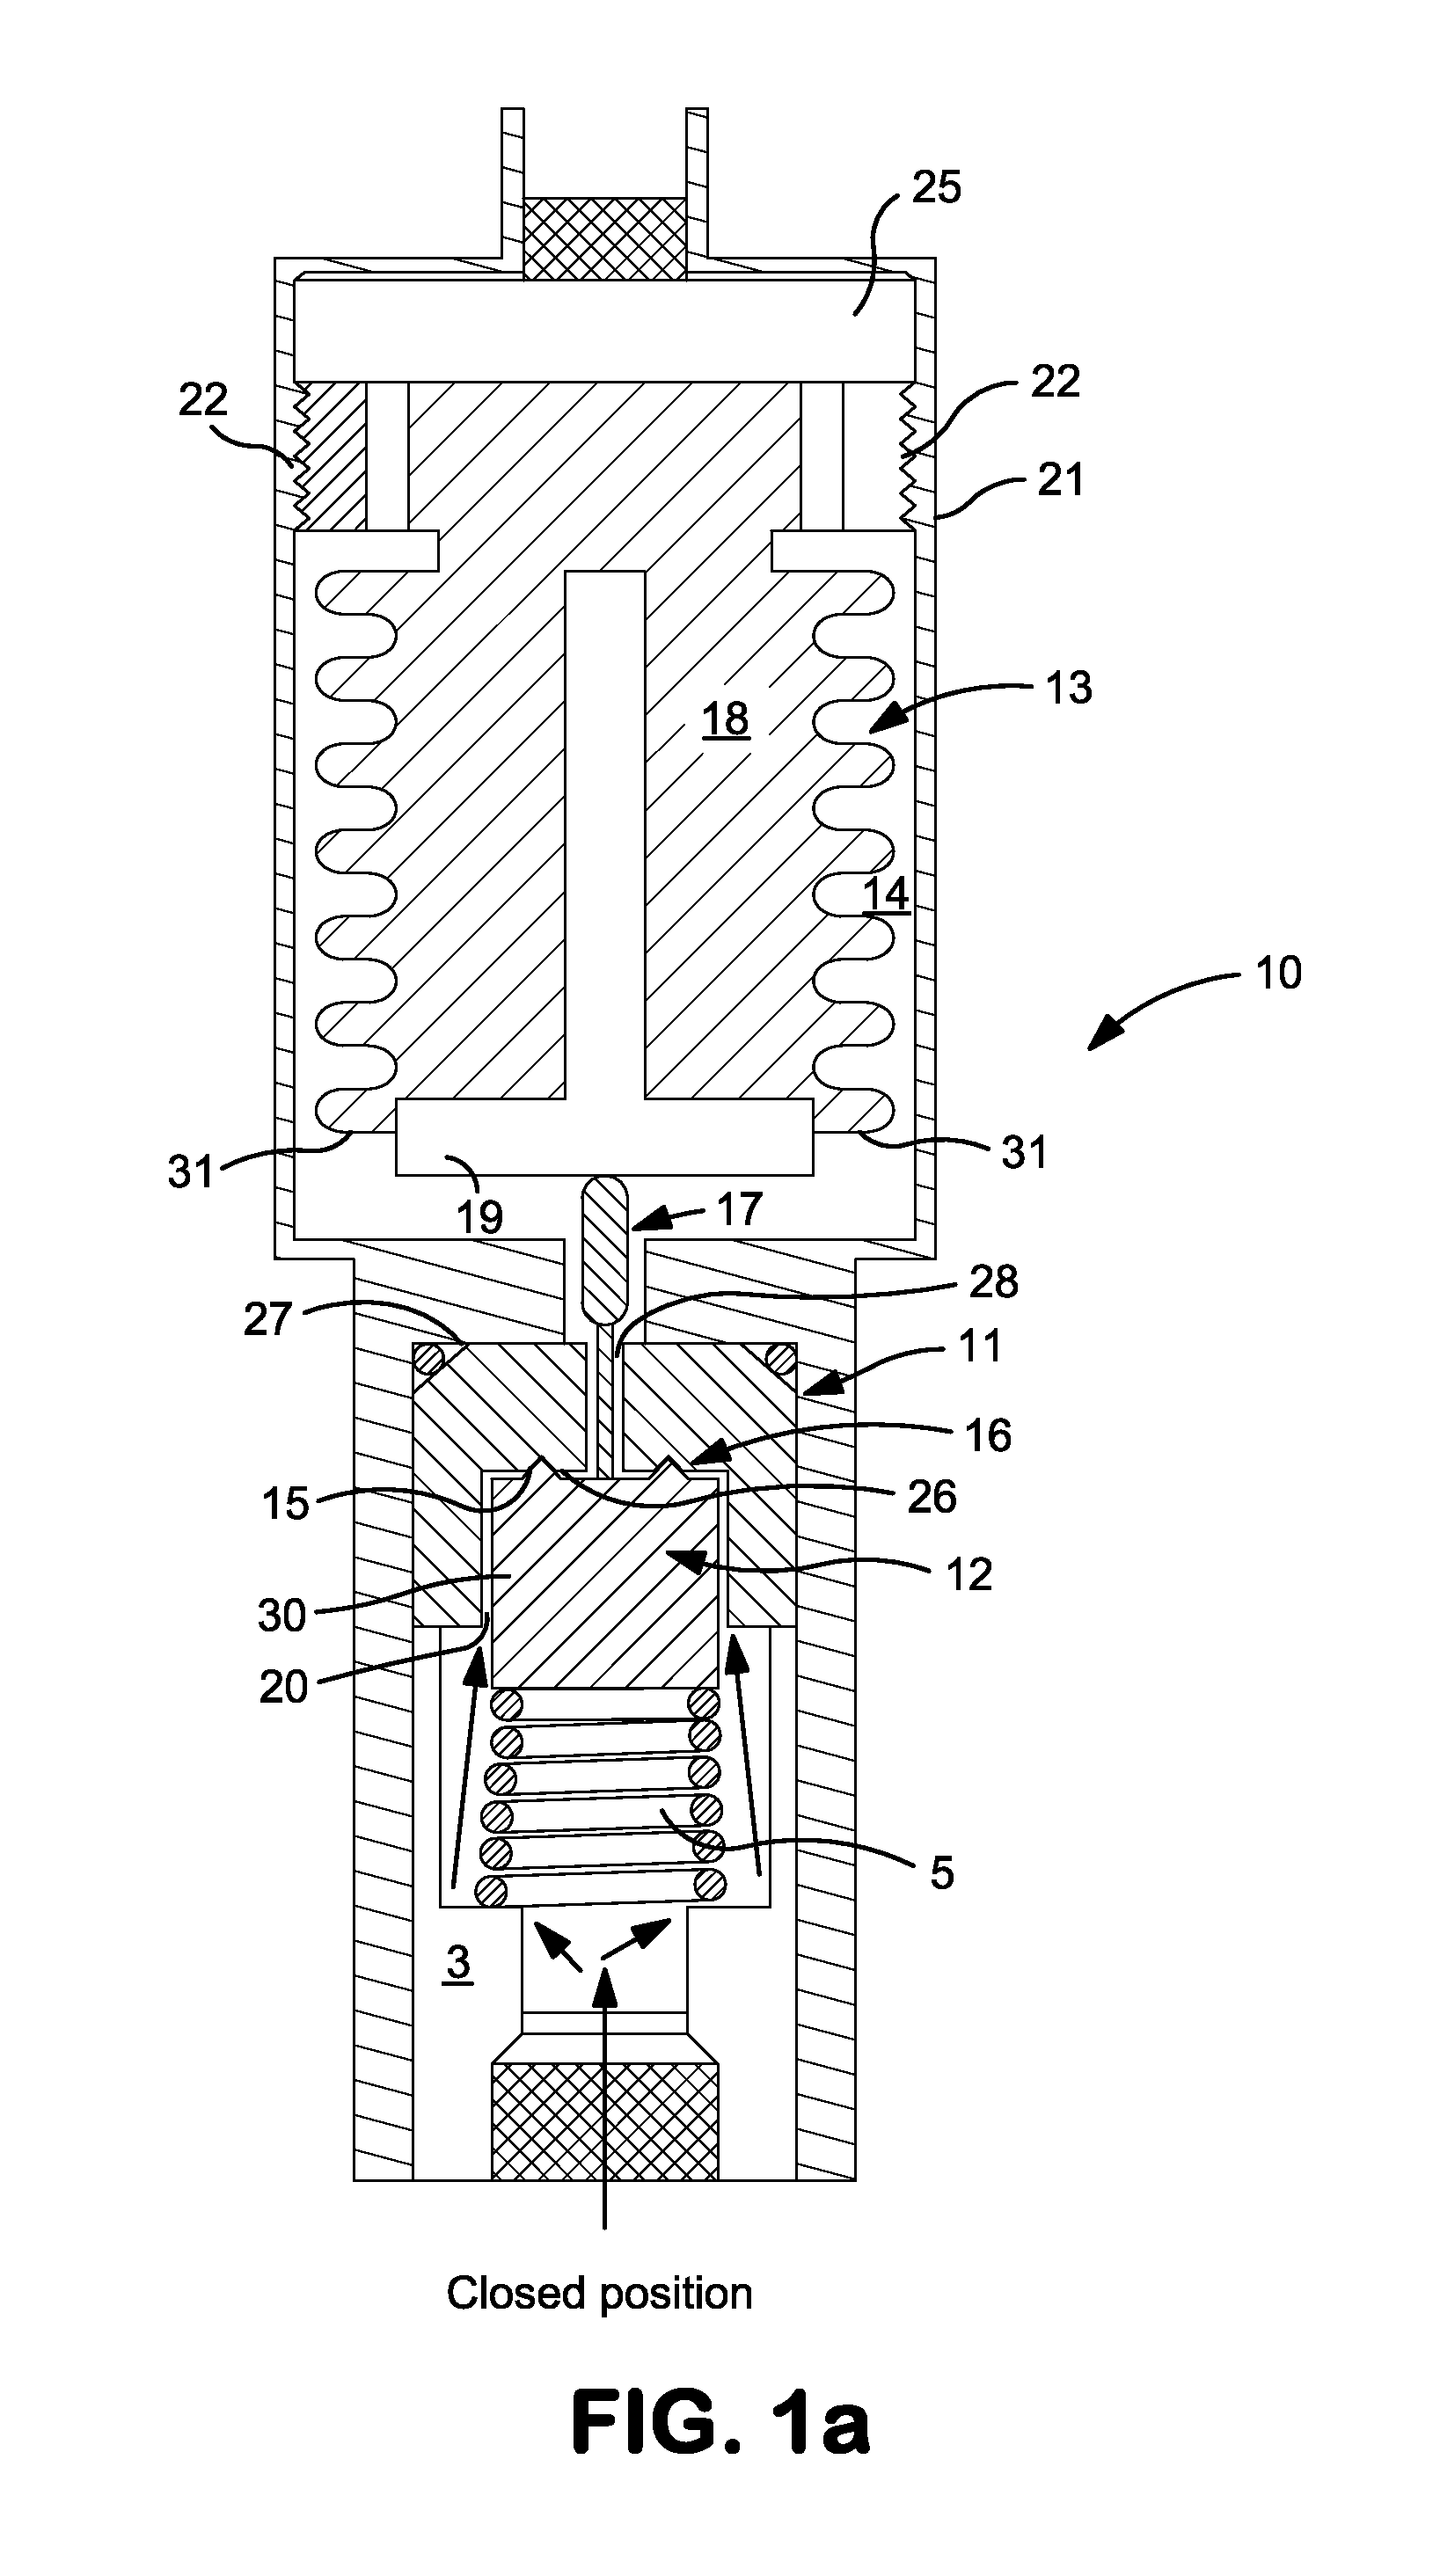 Modified vacuum actuated valve assembly and sealing mechanism for improved flow stability for fluids sub-atmospherically dispensed from storage and delivery systems